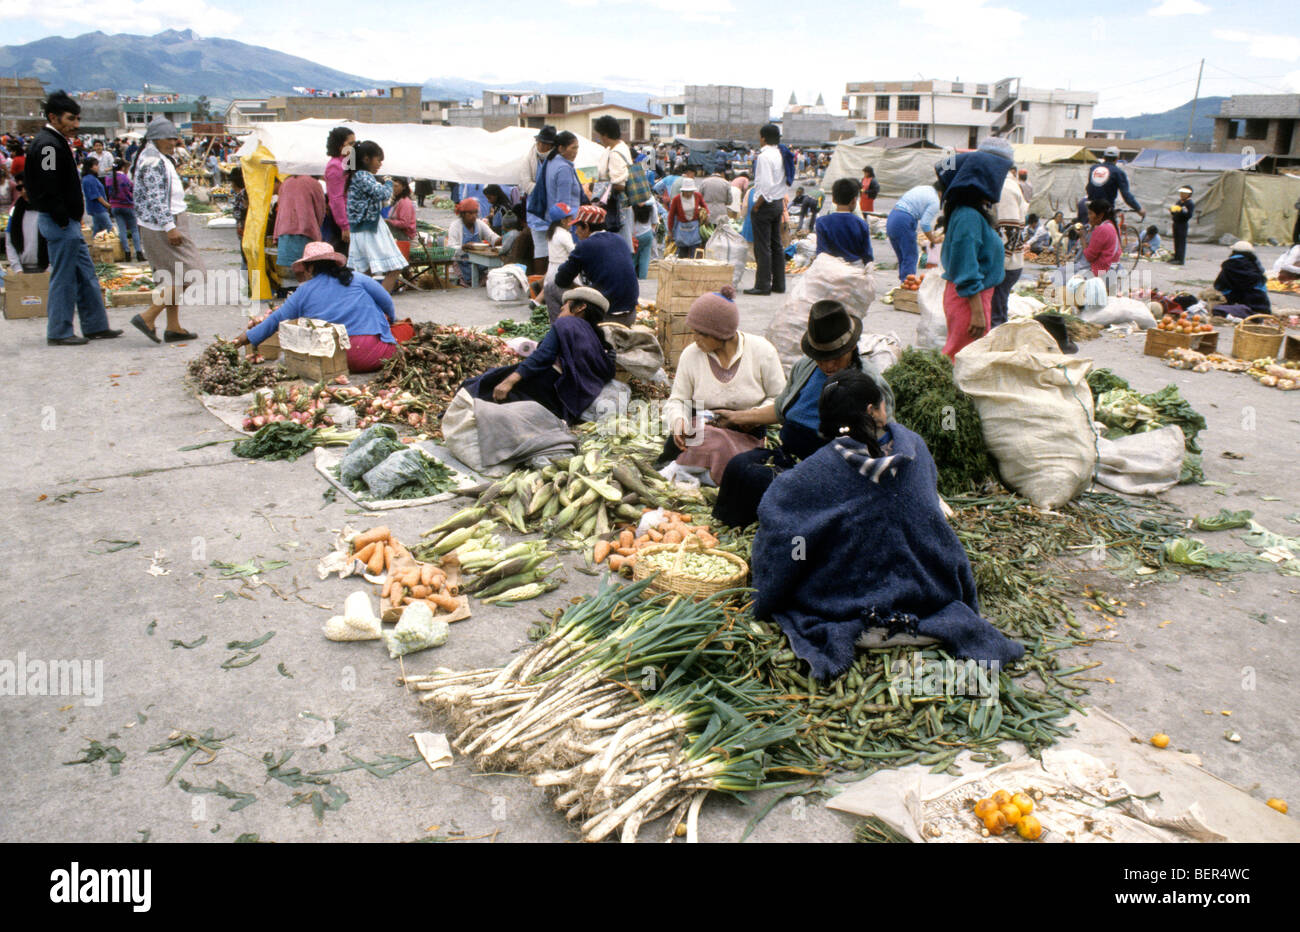 Short row of vegetable sellers  in local market  upland Ecuador Stock Photo